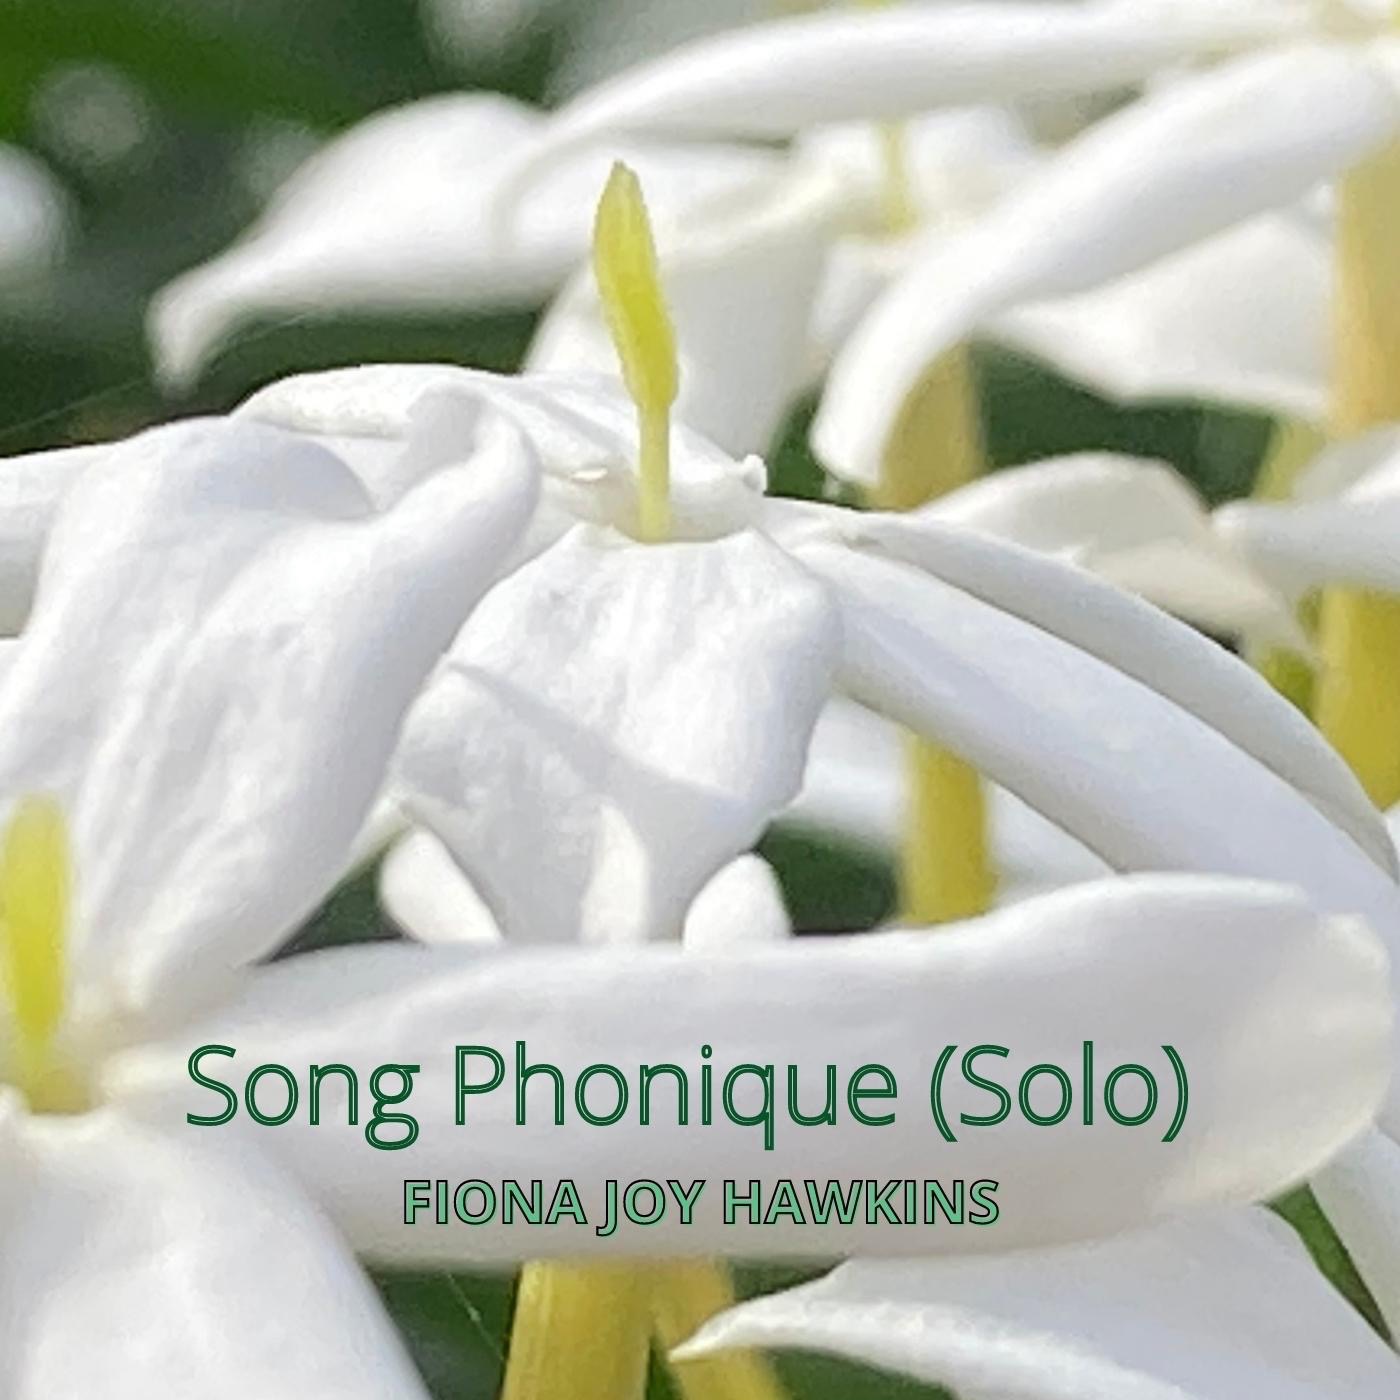 Art for Song Phonique (Solo) by Fiona Joy Hawkins